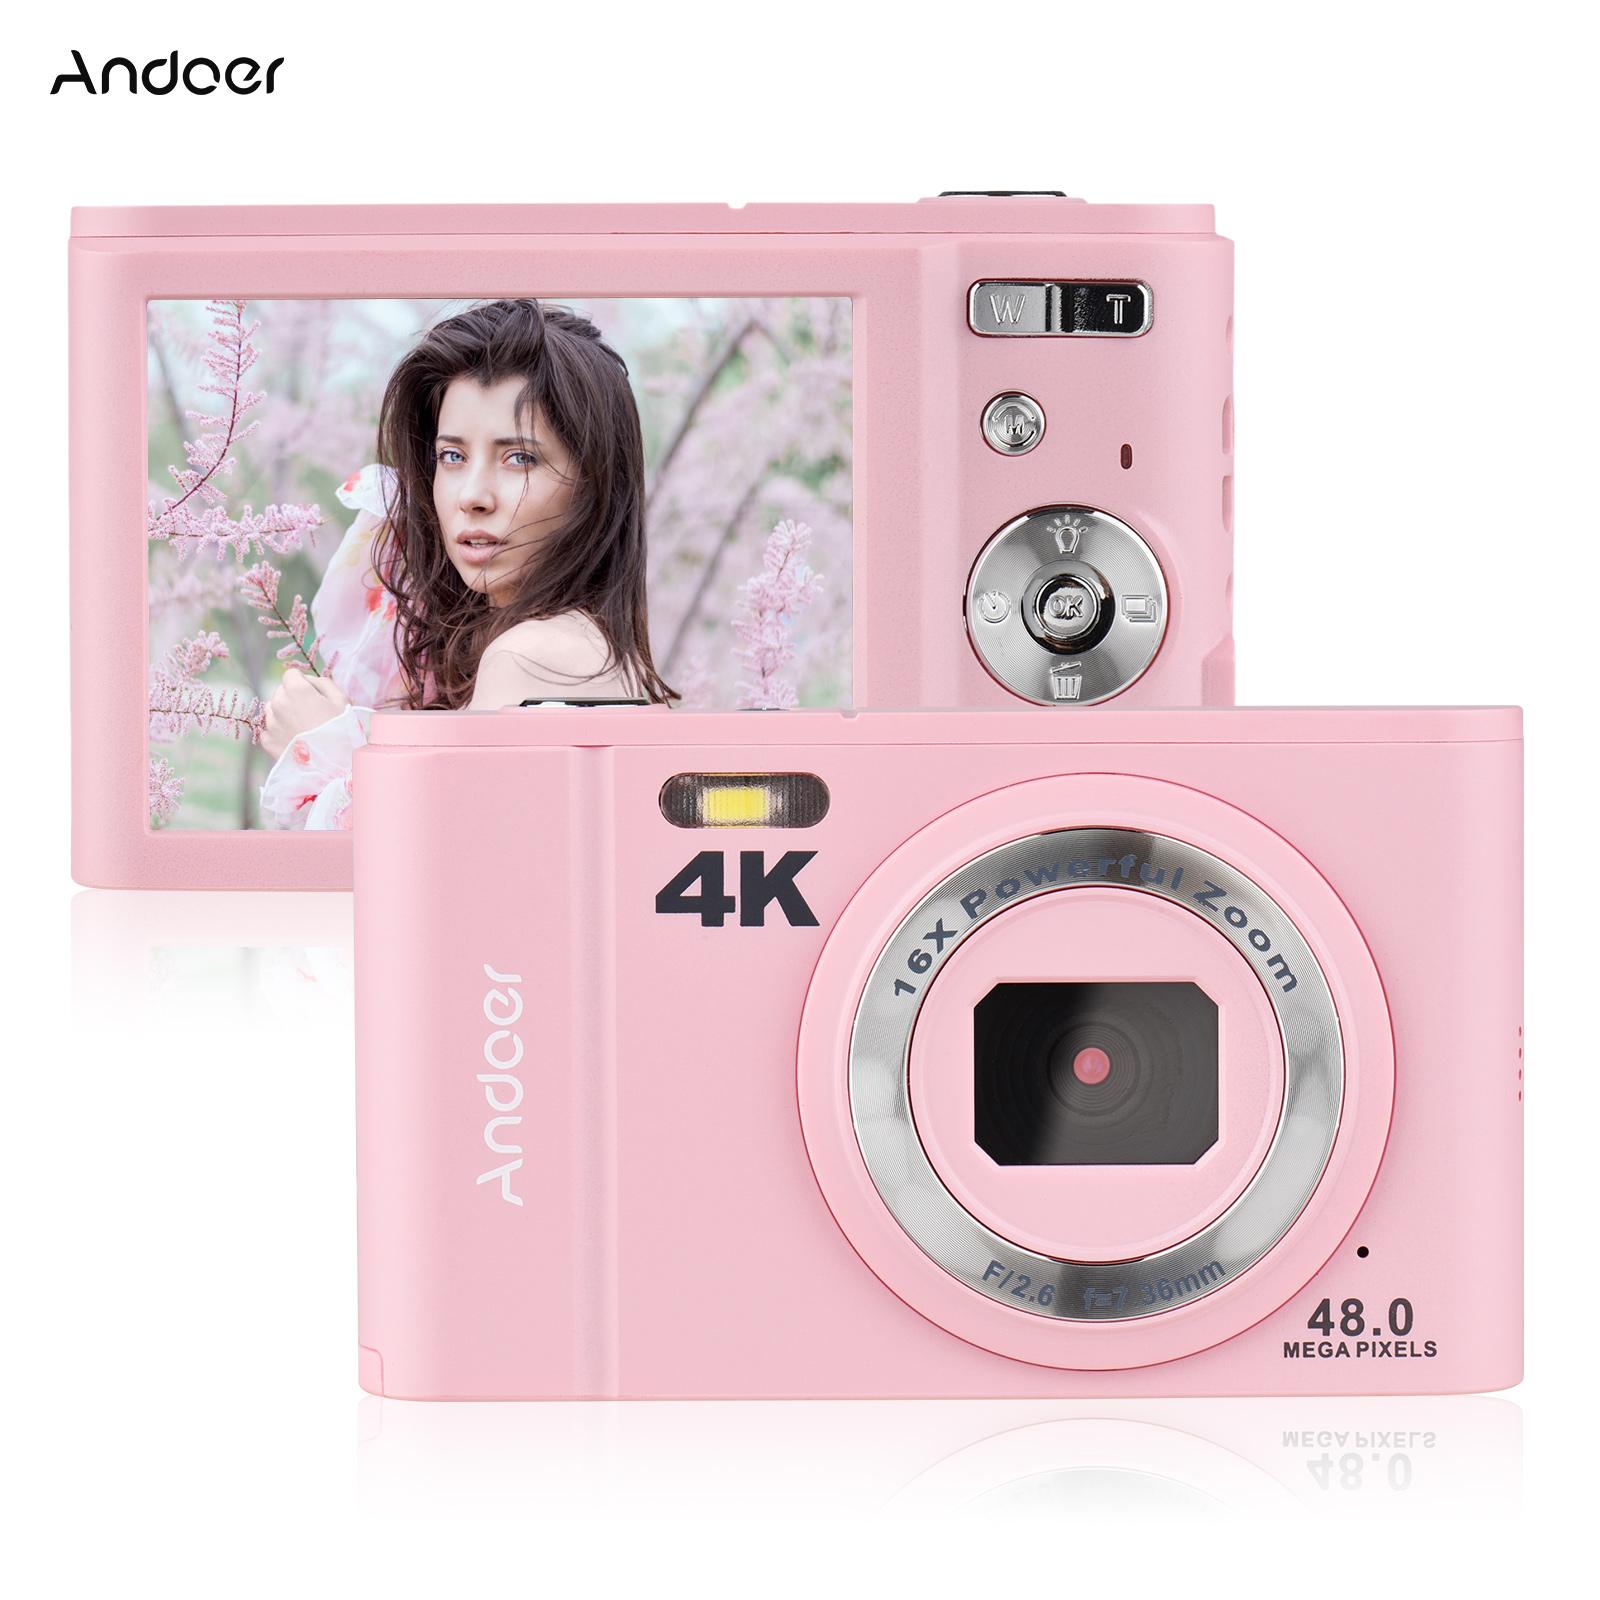 Andoer Portable Digital Camera 48MP 4K 2.8-inch IPS Screen 16X Zoom Self-Timer Face Detection